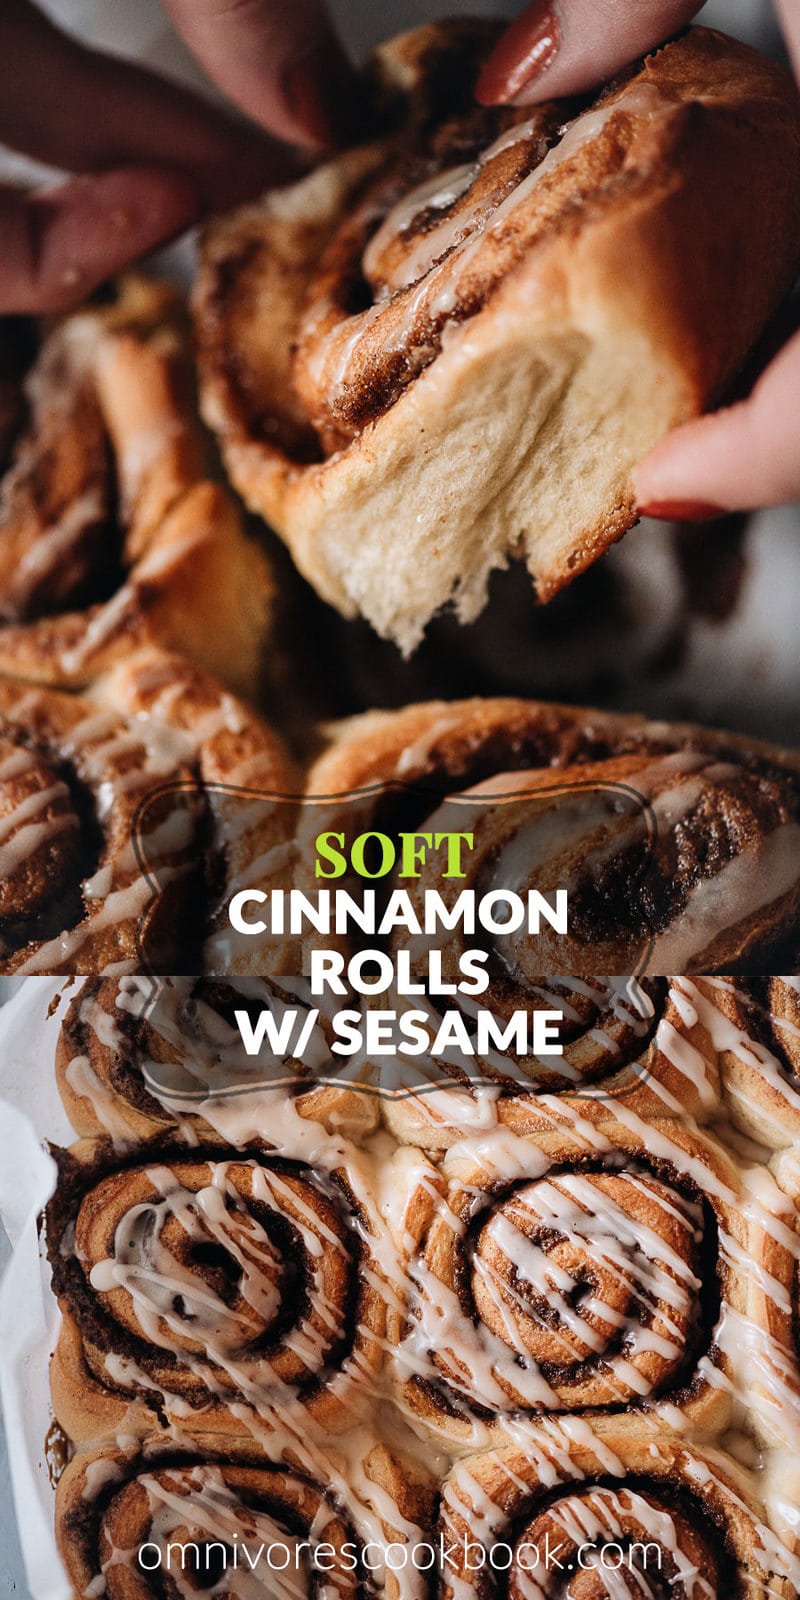 Soft Cinnamon Rolls with Sesame | Easy homemade cinnamon rolls made with a Japanese milk bread formula to create an airy, fluffy texture with a crispy crust, stuffed with cinnamon sugar and a buttery sesame paste. Using a mixer, they’re easy to put together and the result is better than Cinnabon. Cooking video is included